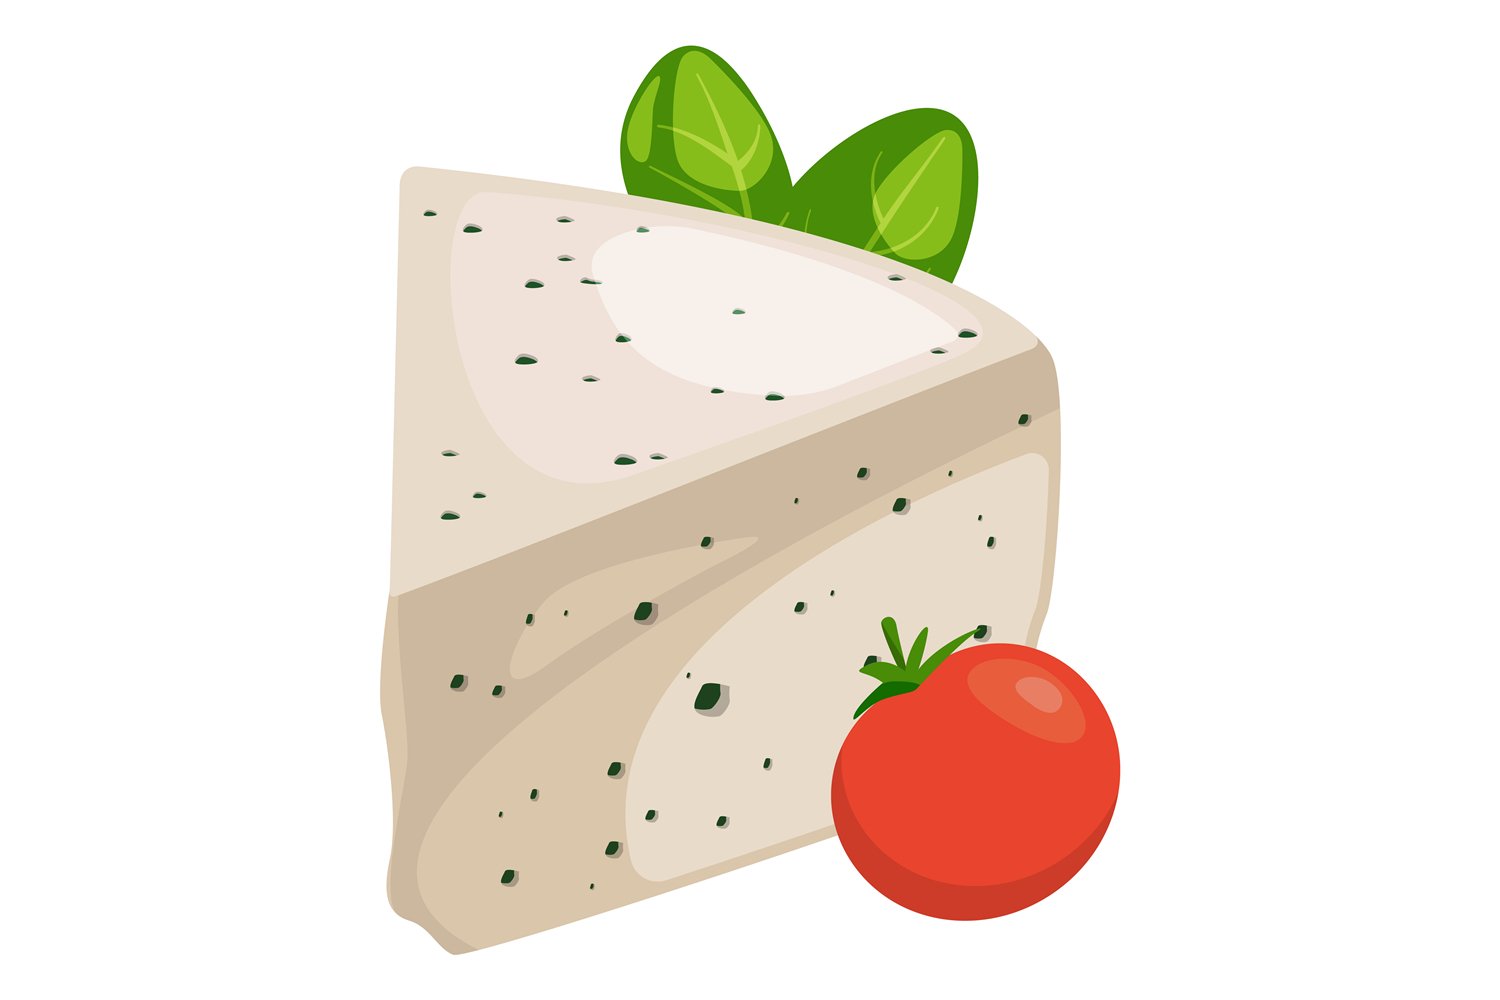 Beautiful image of Rockfort cheese and tomato.